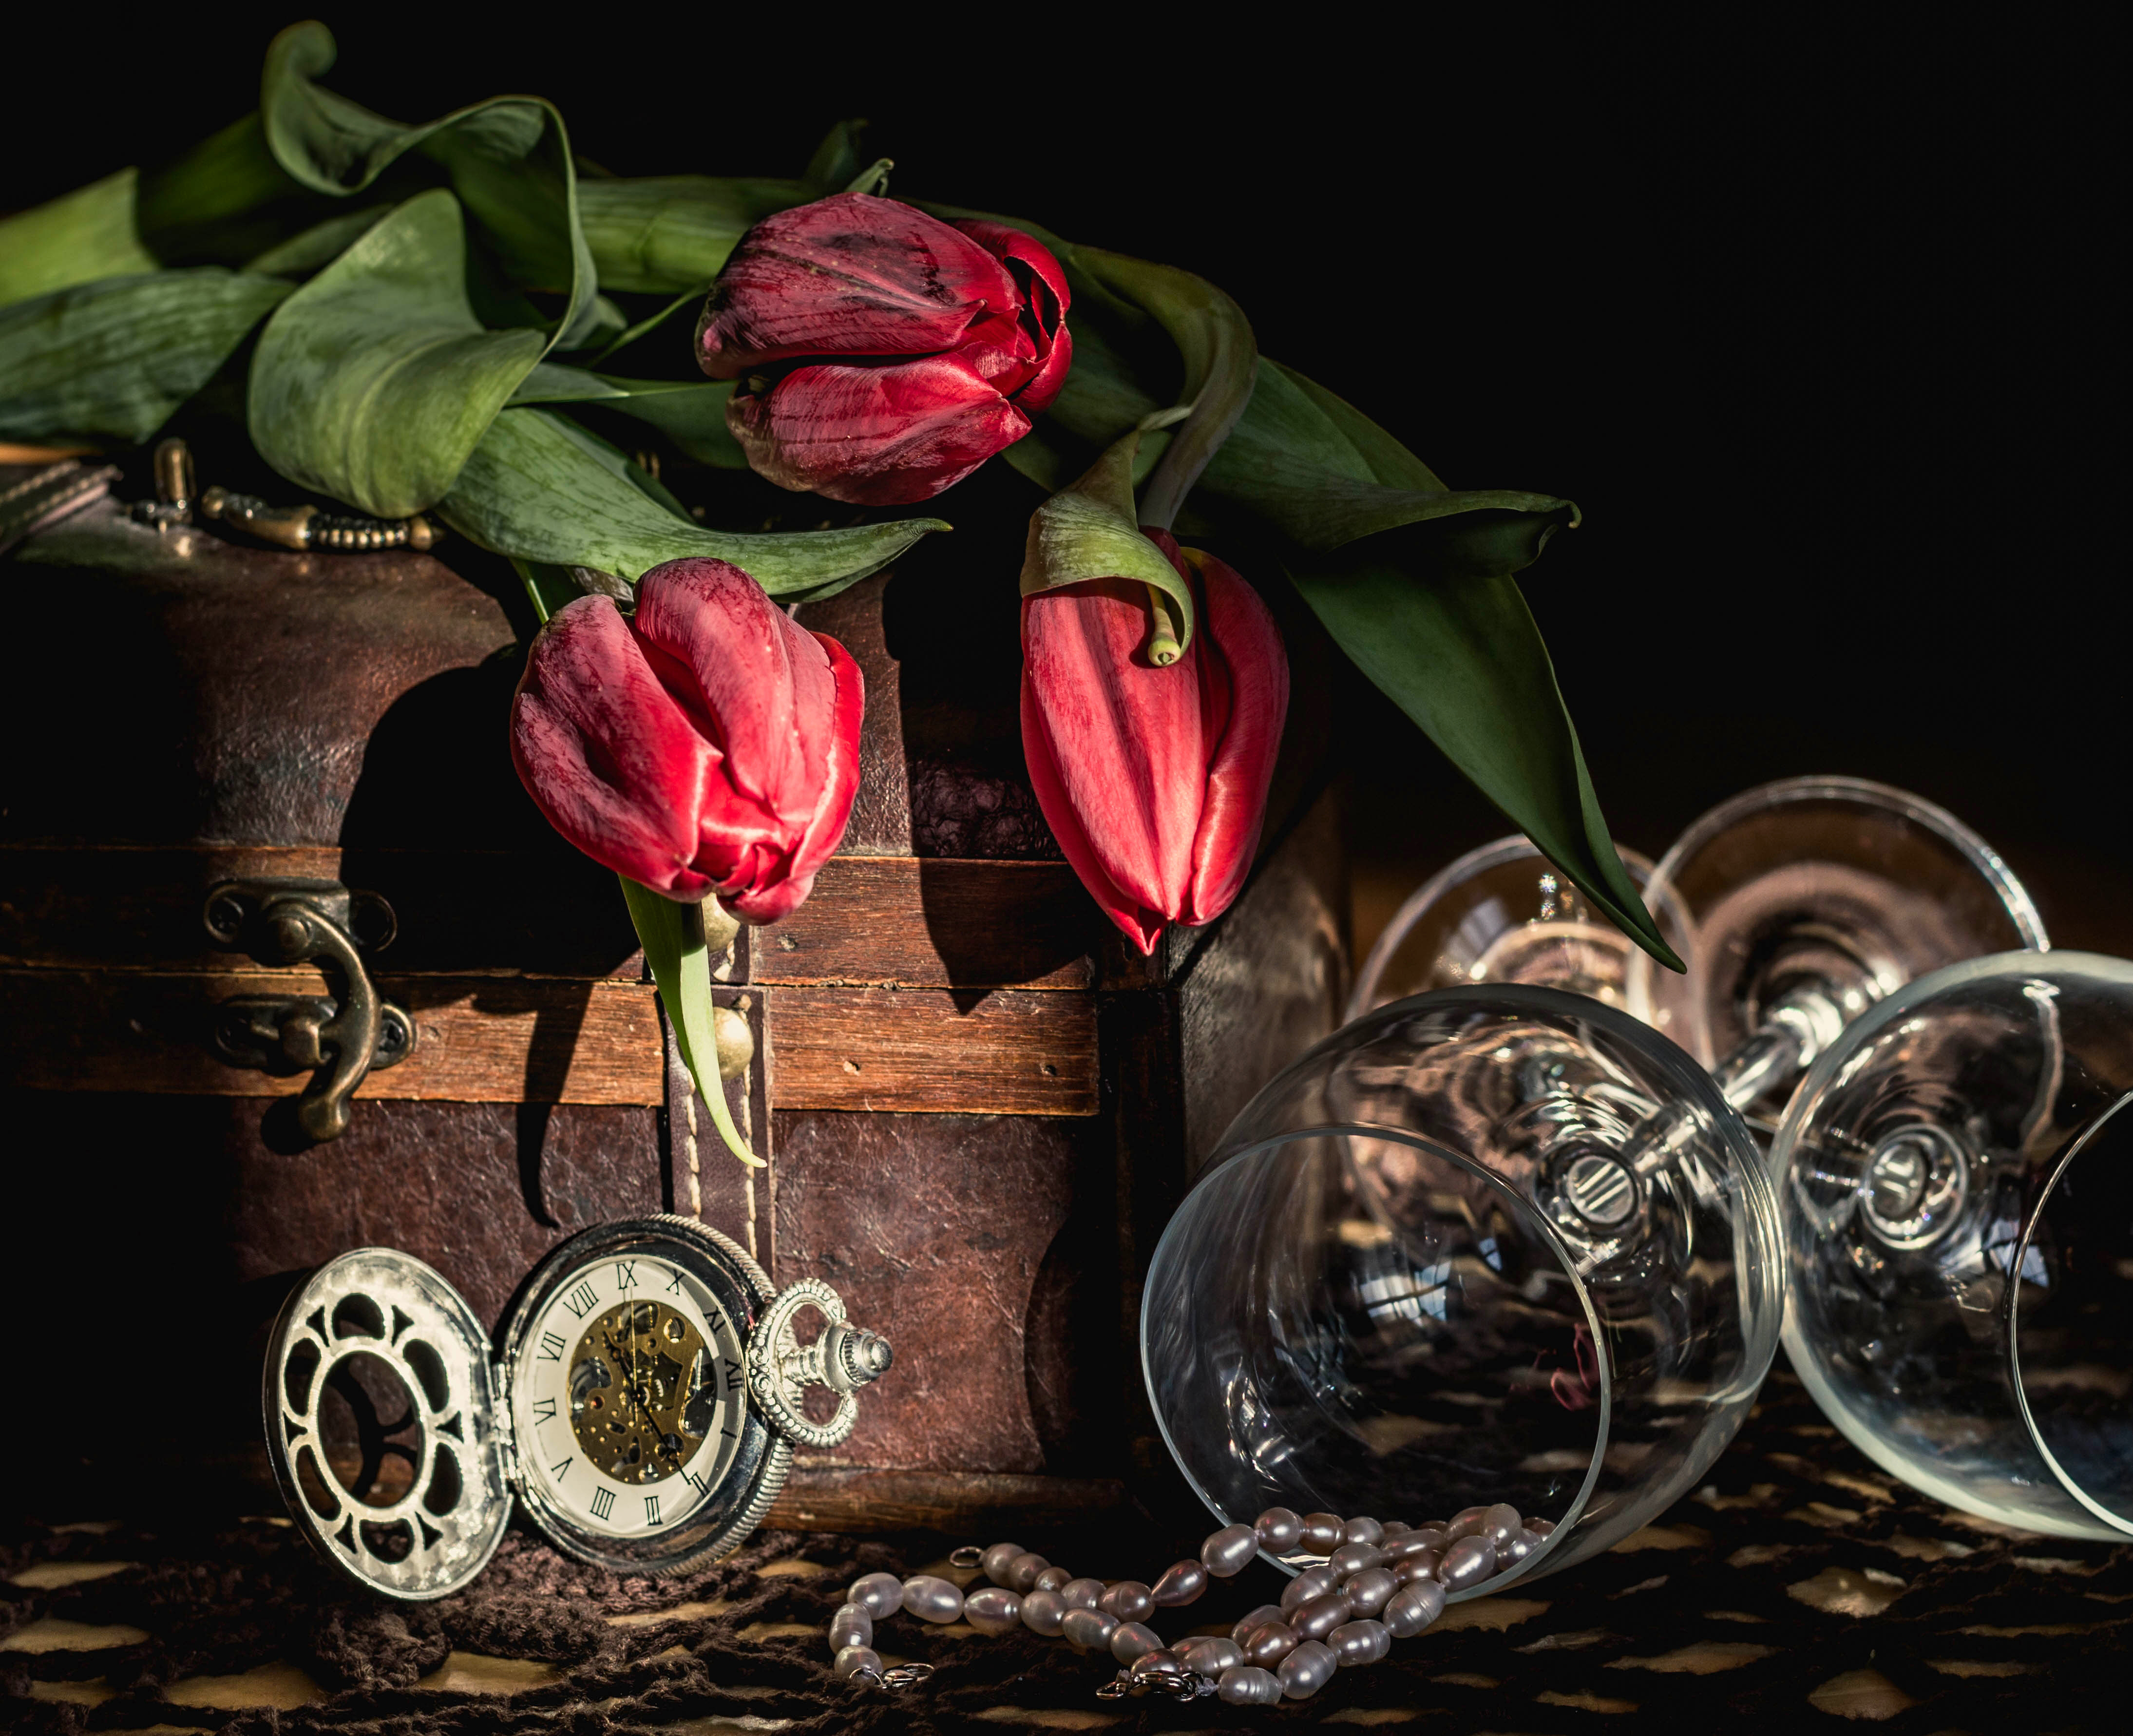 Necklace Watch Still Life Style Wallpaper